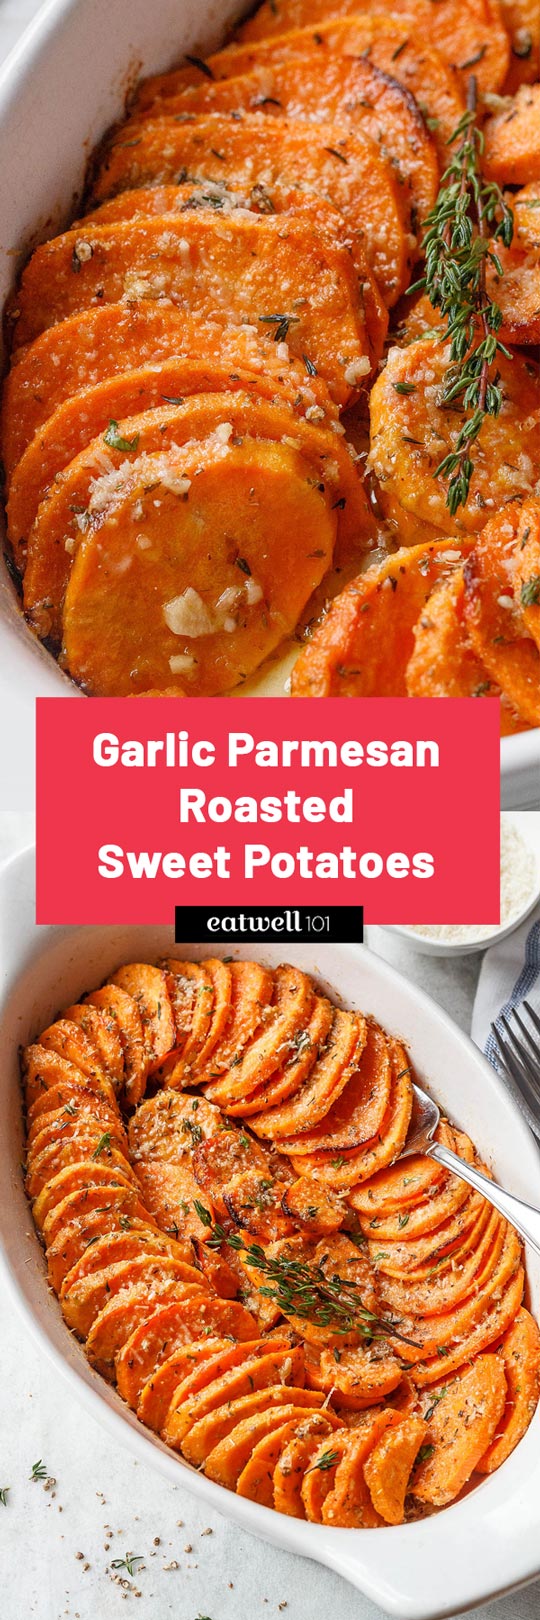 Garlic Parmesan Roasted Sweet Potatoes Recipe - #eatwell101 #recipe Tender, extra-flavorful Roasted Sweet Potatoes  and easy to make. 